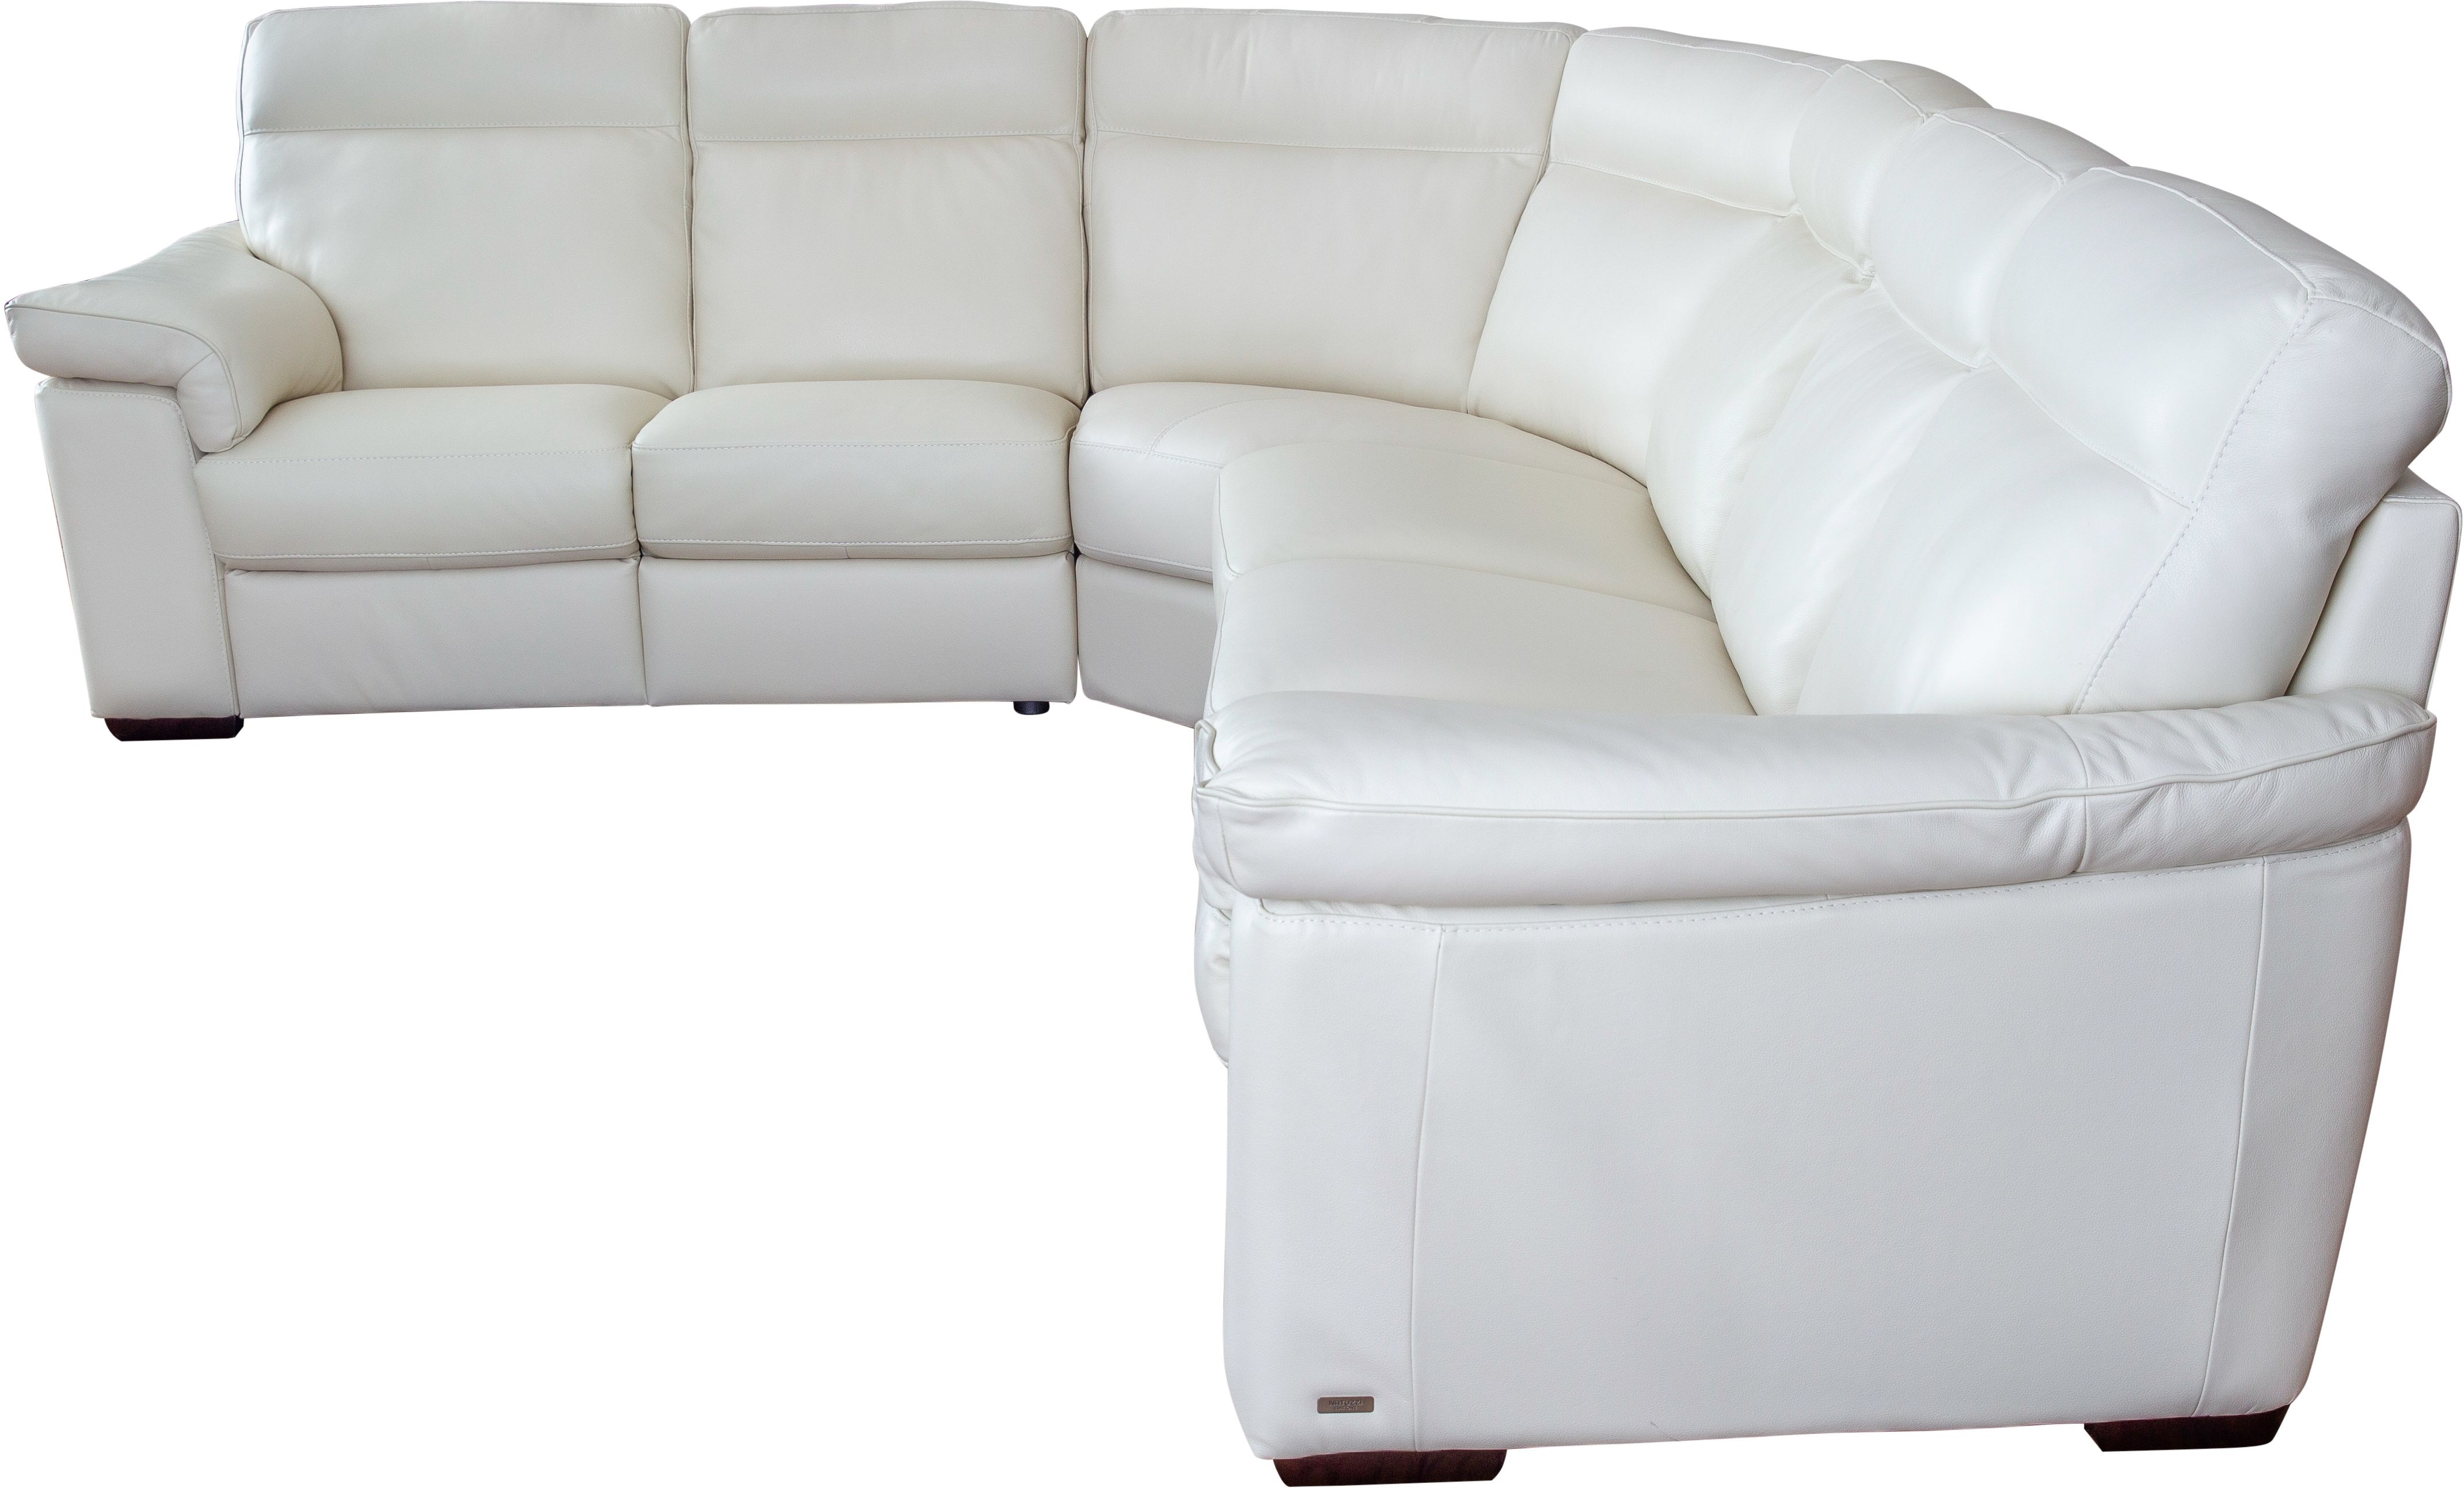 Gallery Leather - Natuzzi FL 4pc Power Myers, Reclining Fort Sectional Editions - Florida